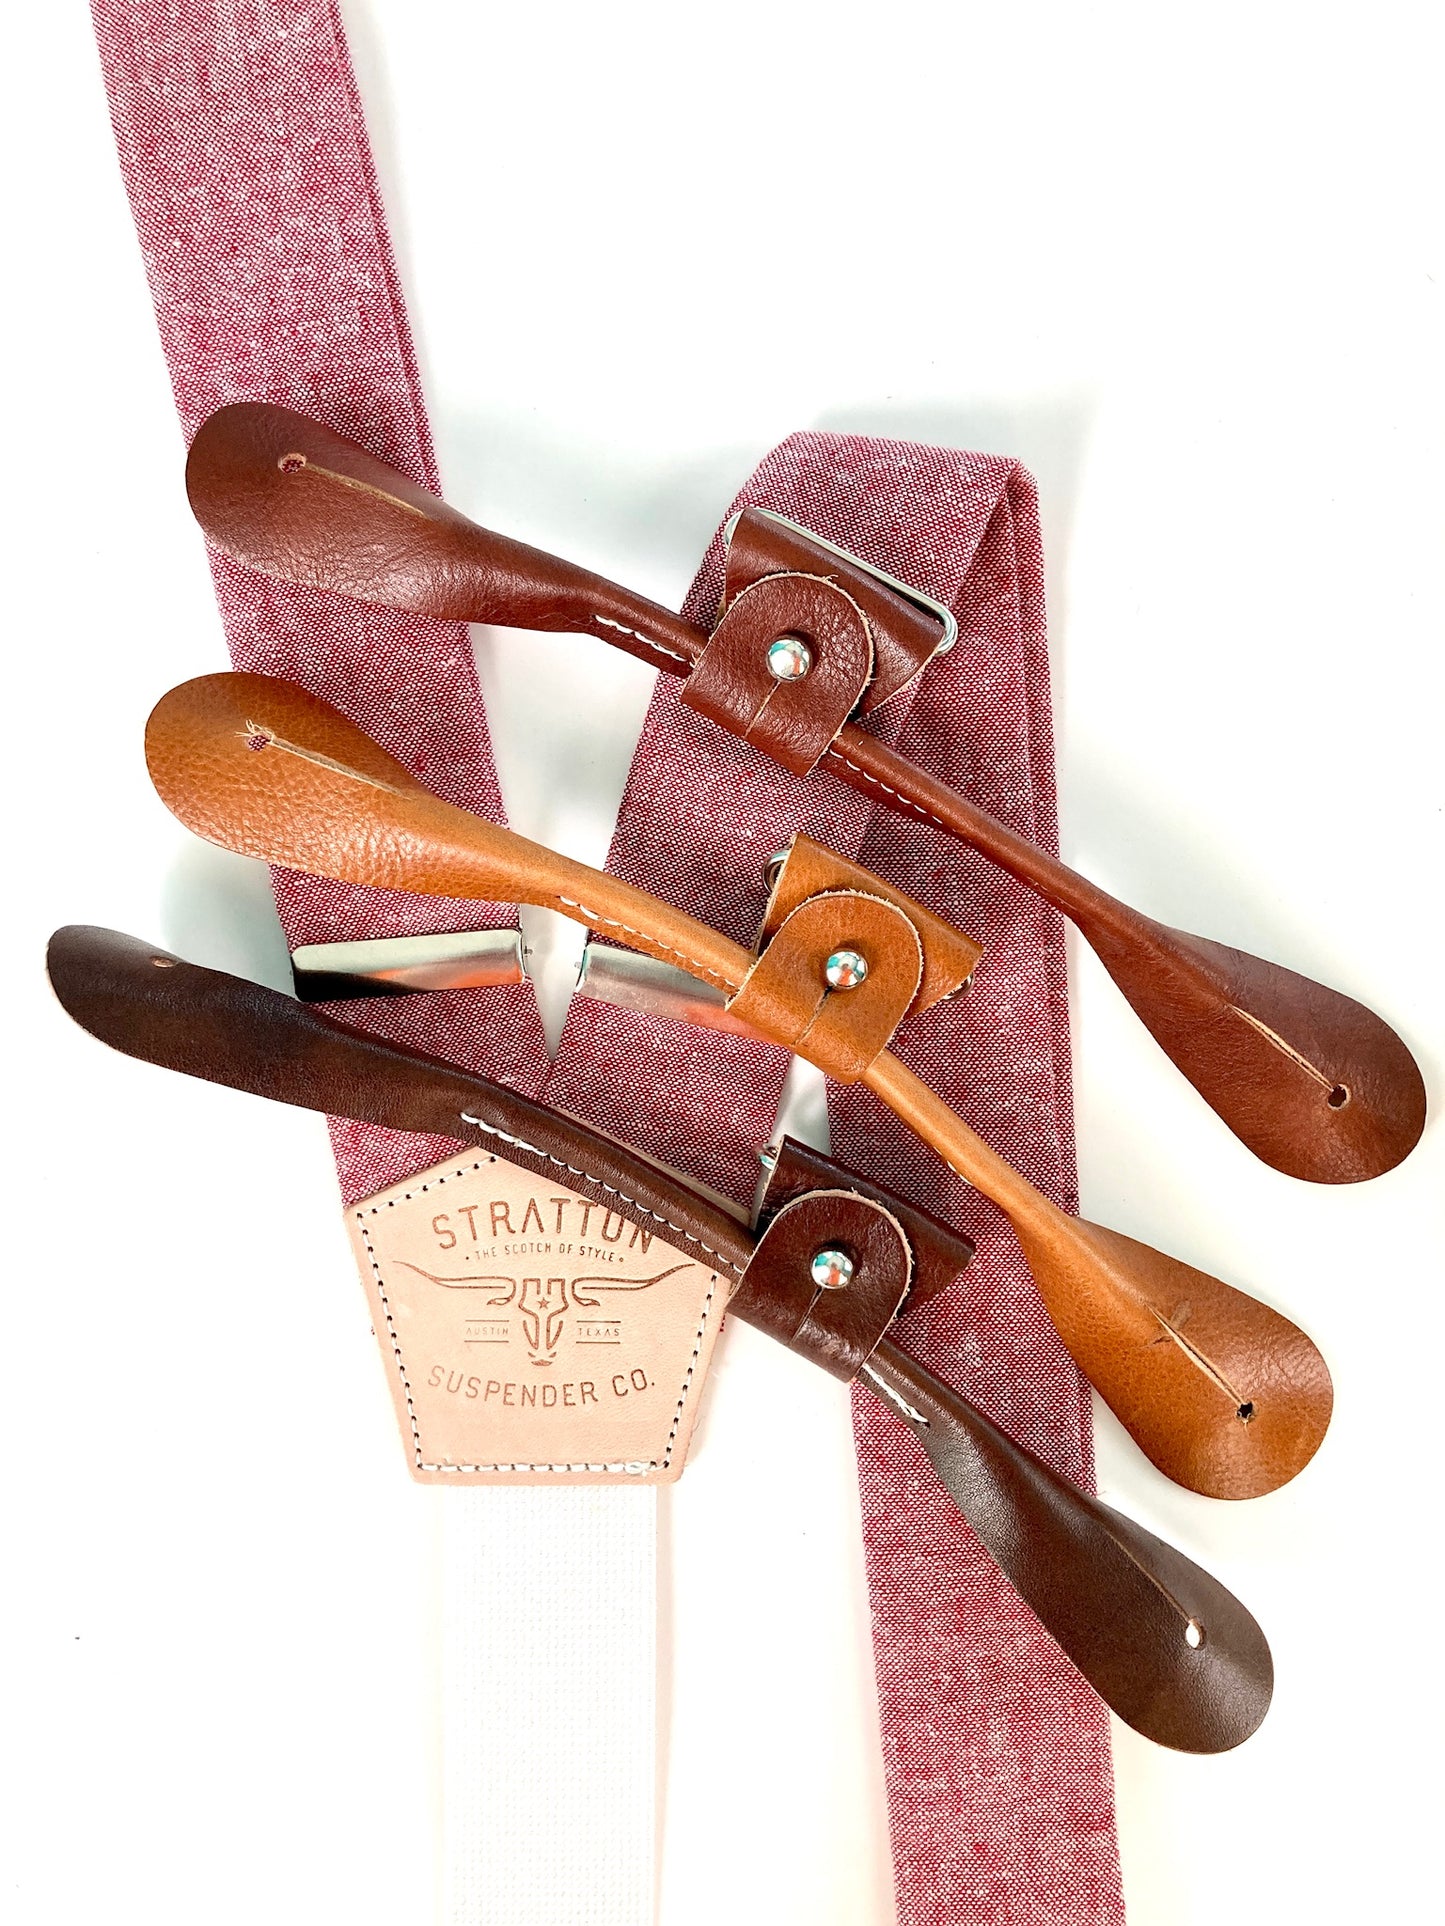 Stratton Suspender Co. Button On Set in Bandera Red Linen featuring Tan, Cognac, and Chocolate Italian Pontedero Leather